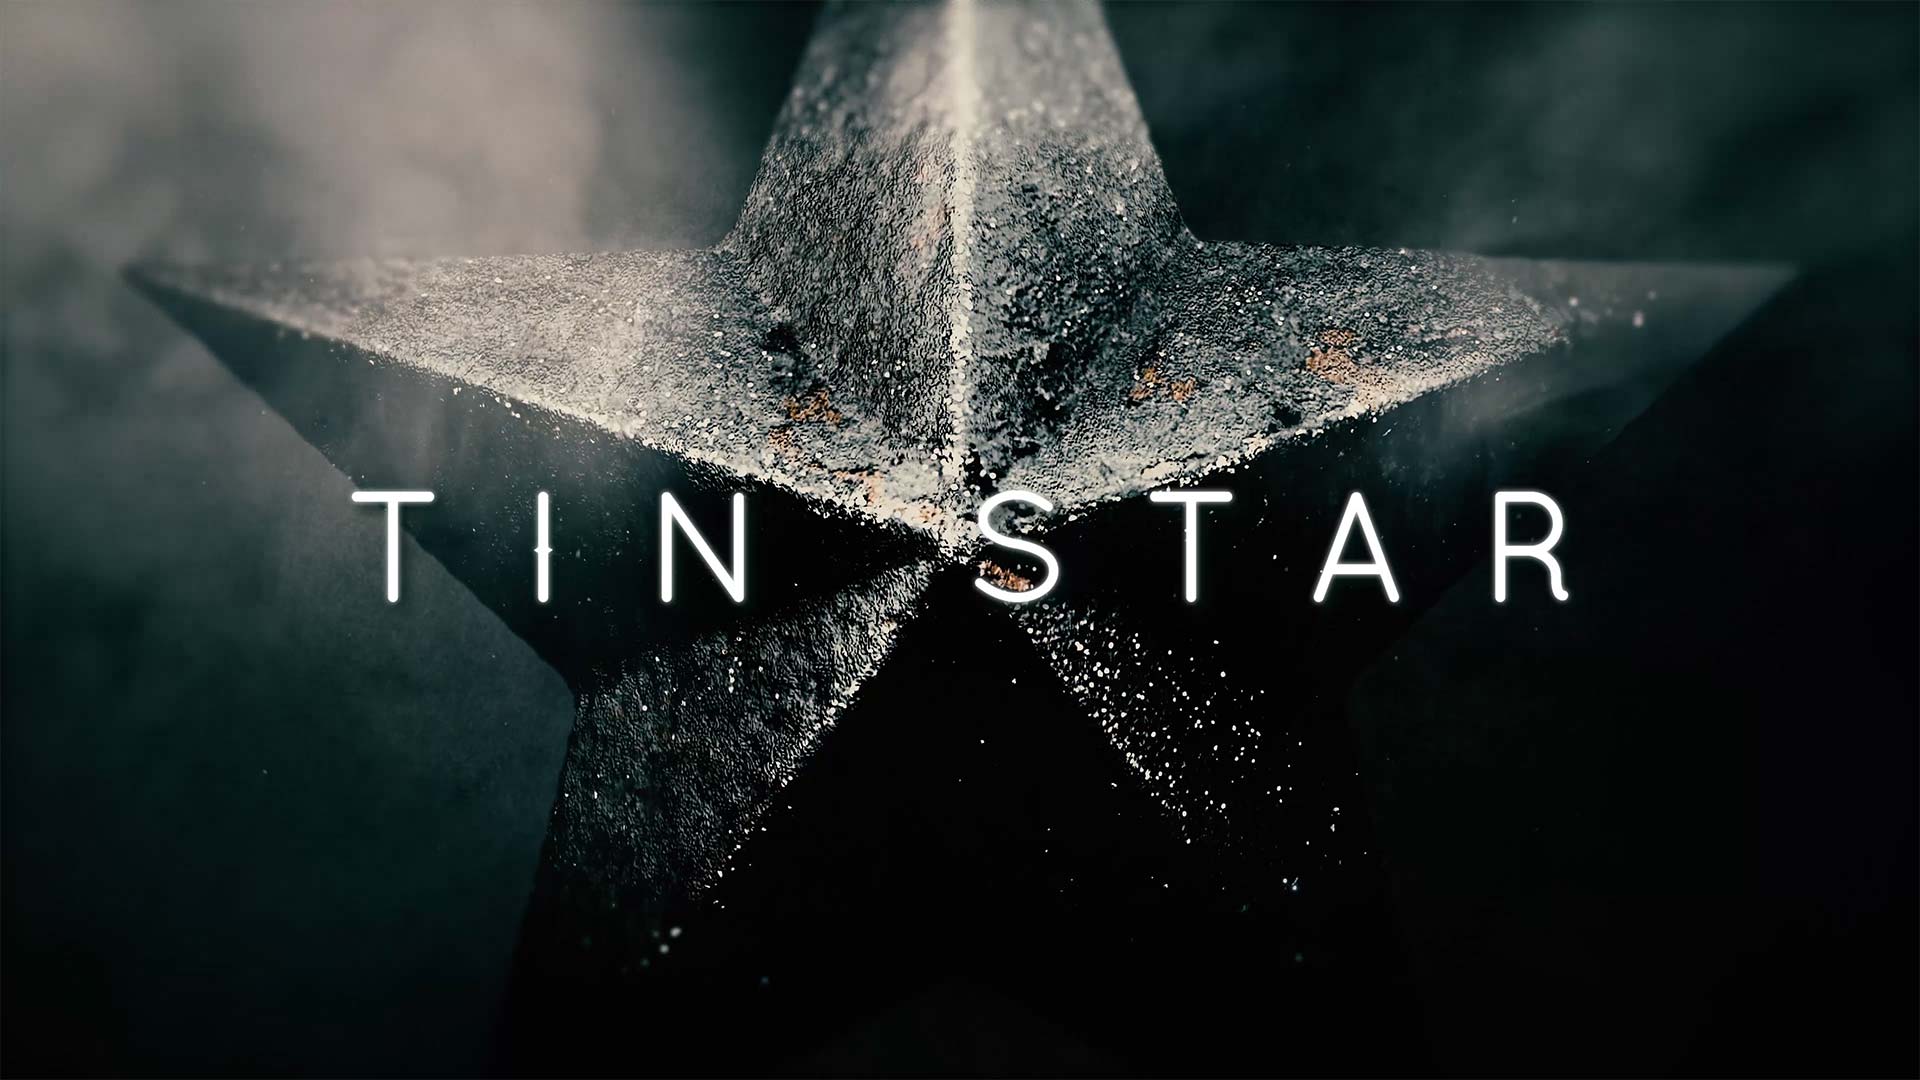 Peter Anderson Studio Tin star title sequence02